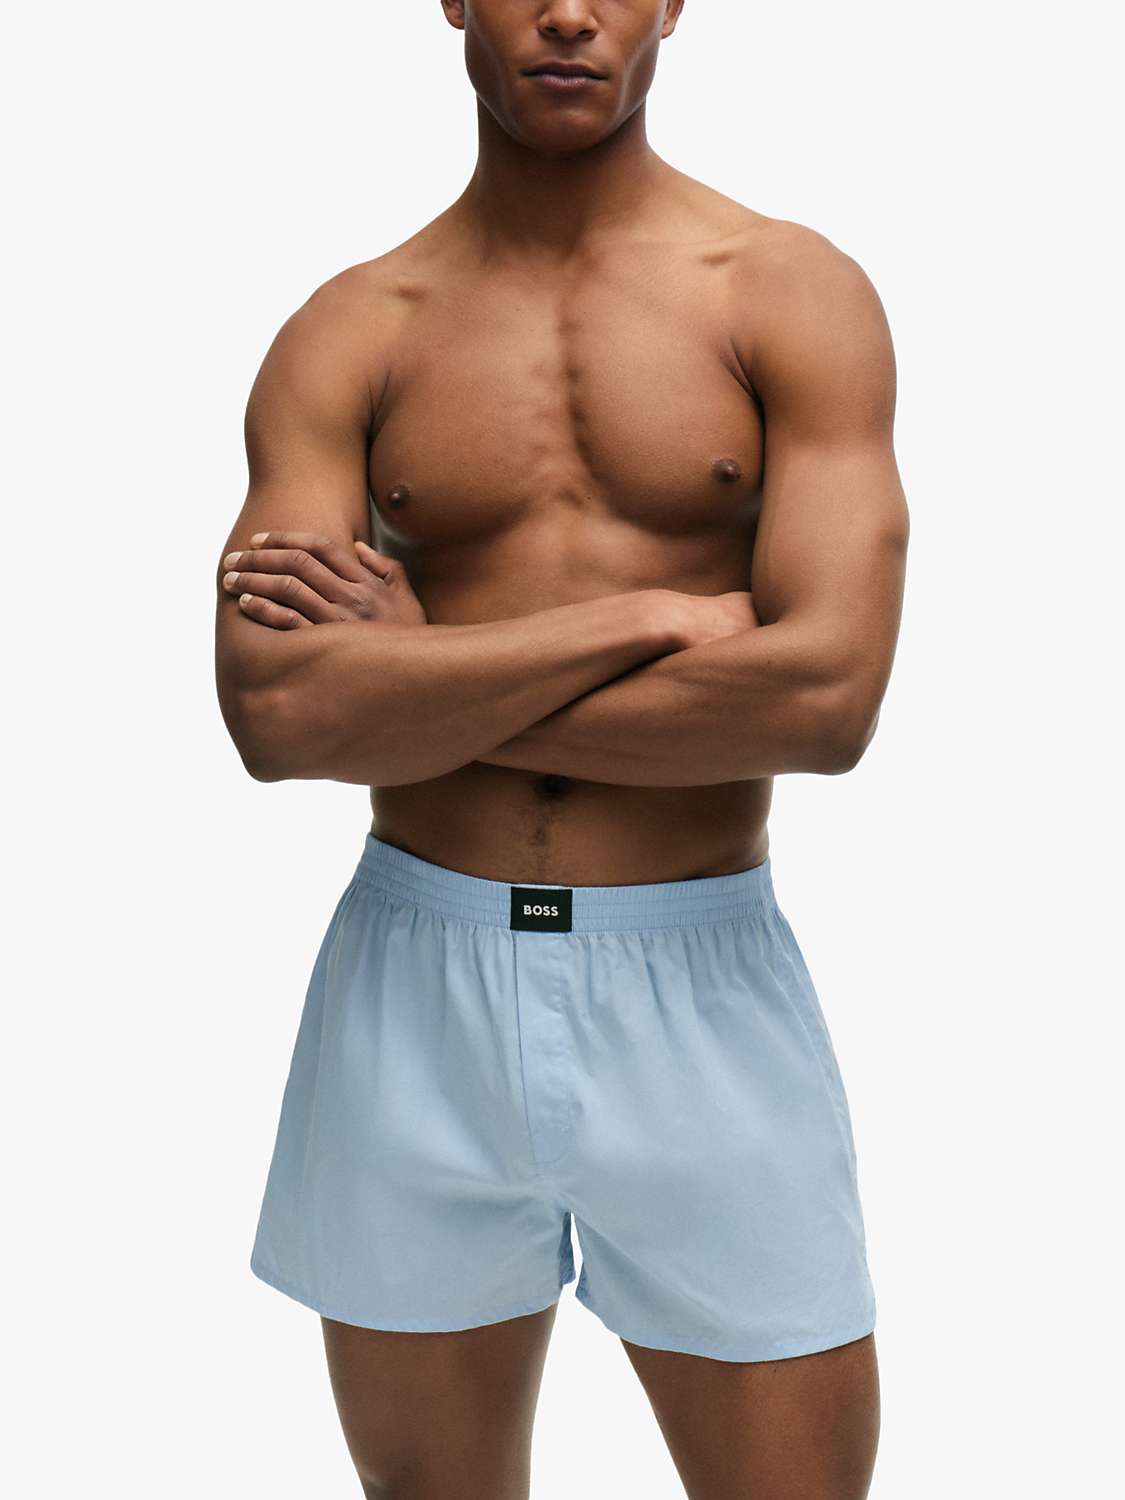 Buy BOSS Plain and Check Cotton Boxer Shorts, Pack of 2, Dark Blue/Light Blue Online at johnlewis.com